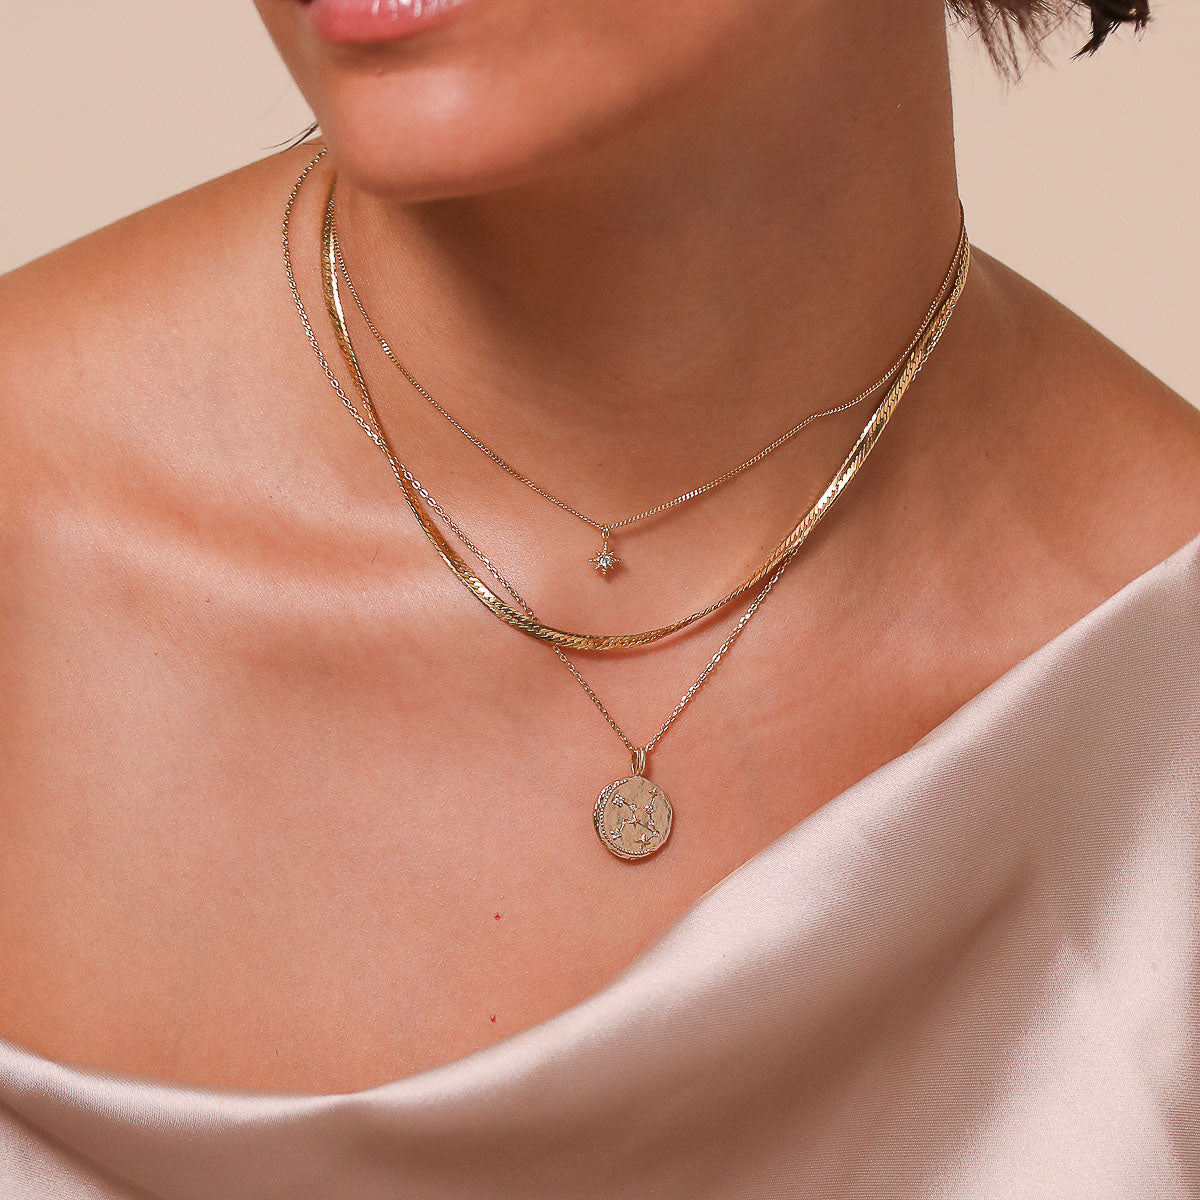 Virgo Zodiac Pendant Necklace in Gold worn layered with necklaces